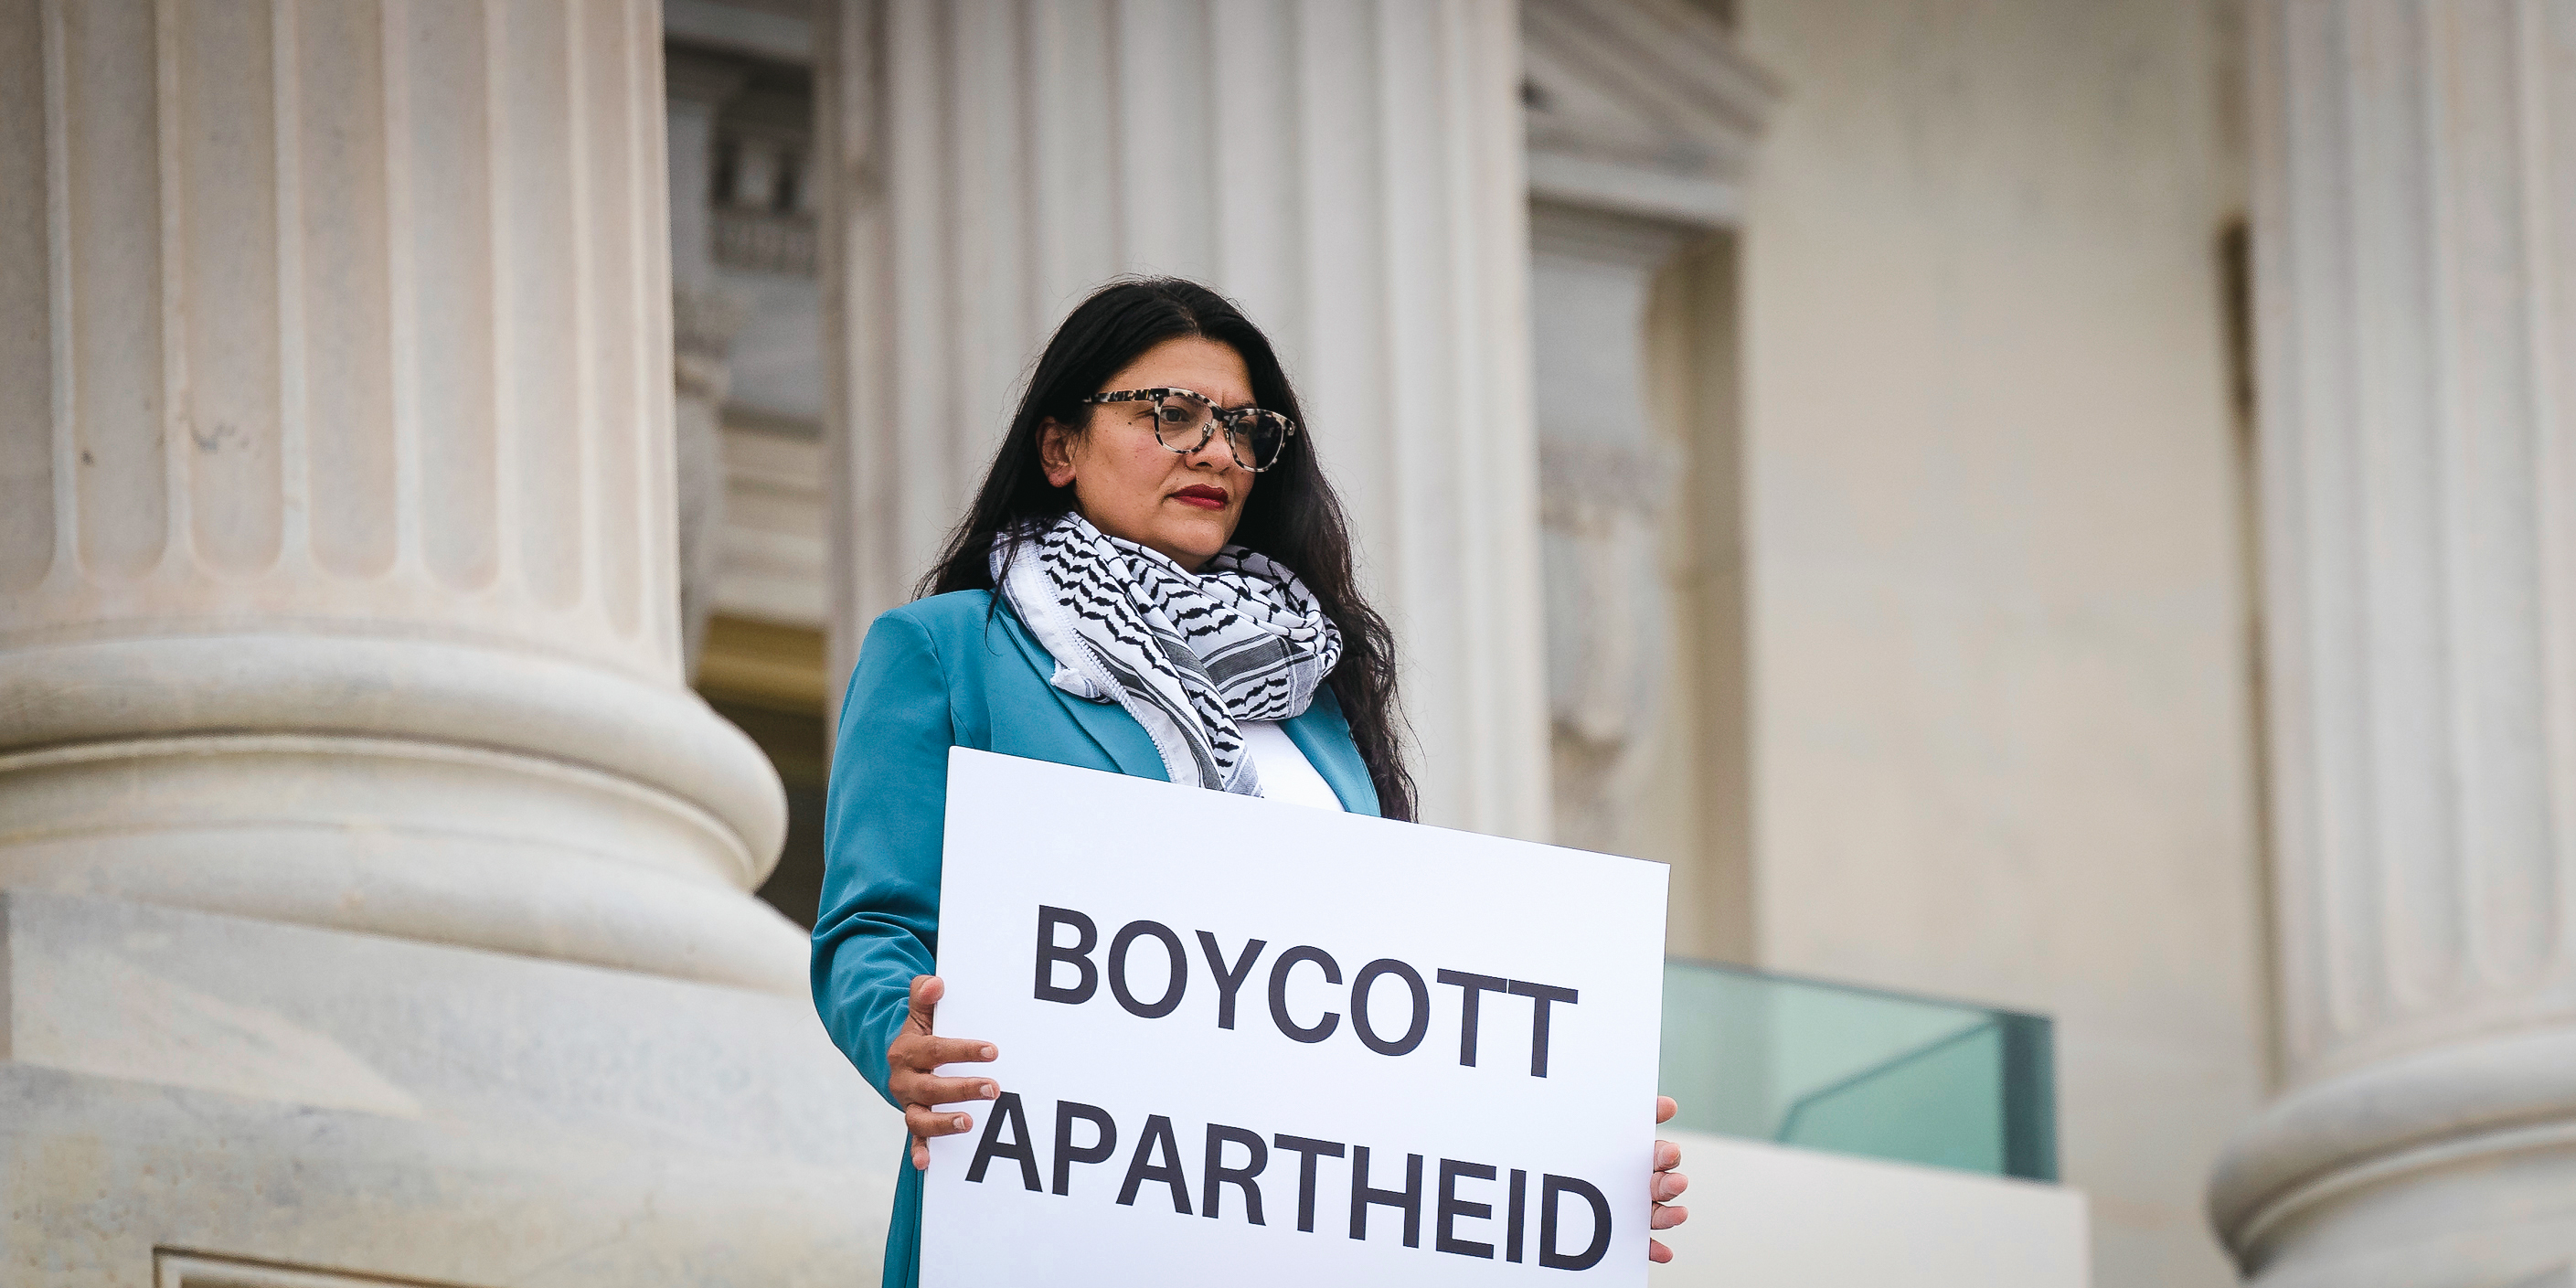 Rep. Rashida Tlaib (D-Mich.) holds a sign that reads "BOYCOTT APARTHEID" while an aide takes a photograph outside the U.S. Capitol July 17, 2023. (Francis Chung/POLITICO via AP Images)